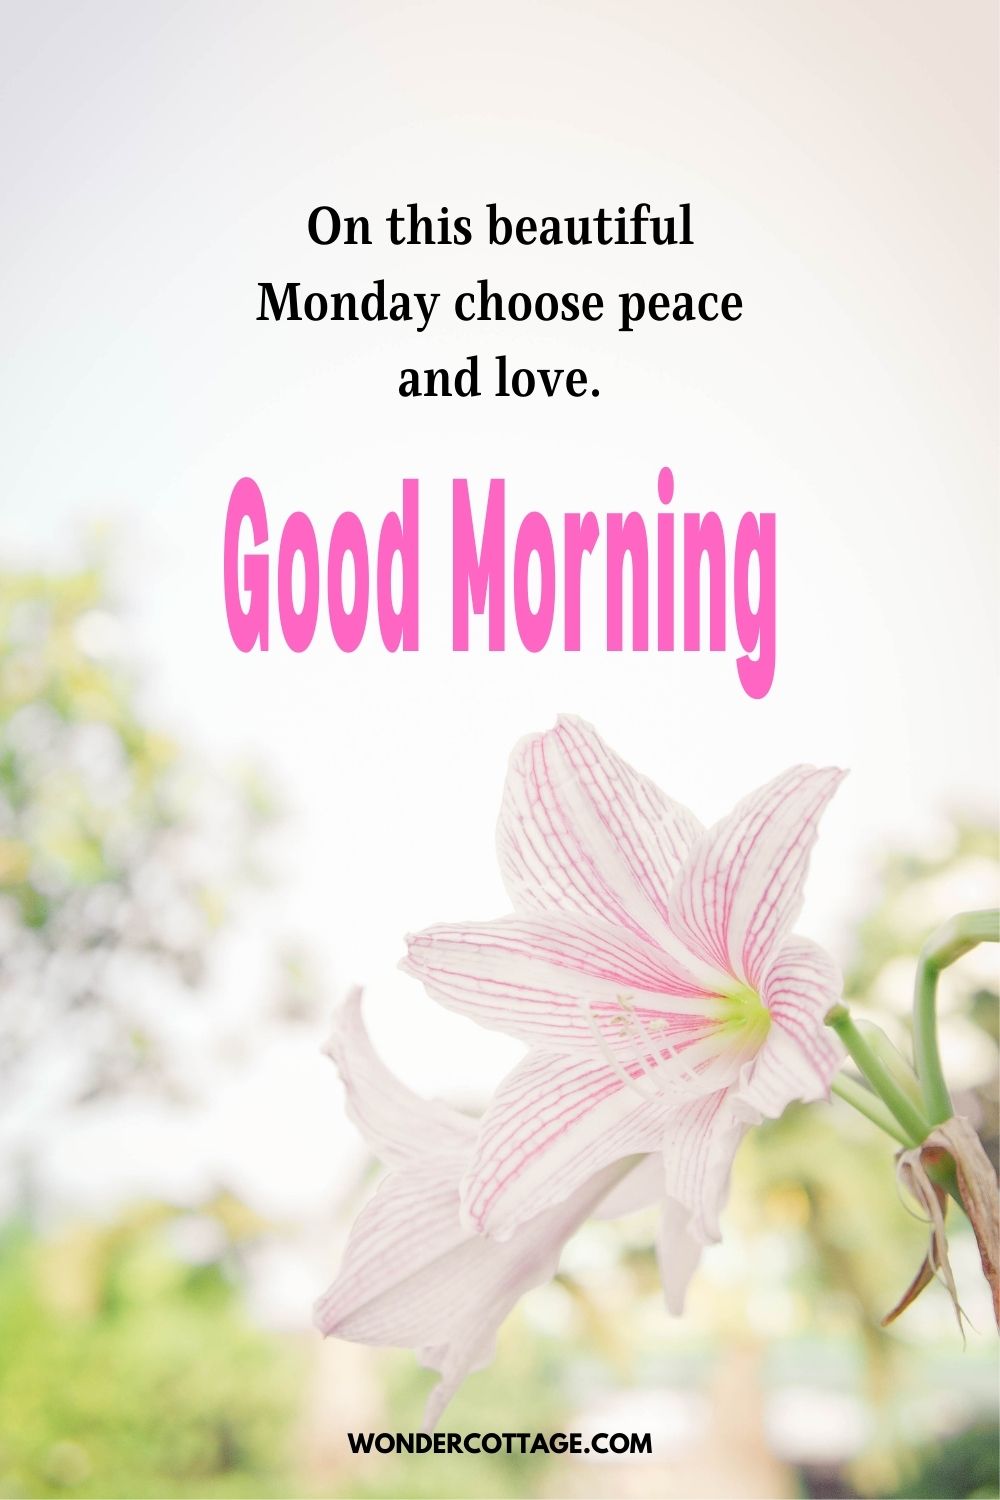 On this beautiful Monday choose peace and love. Good Morning!